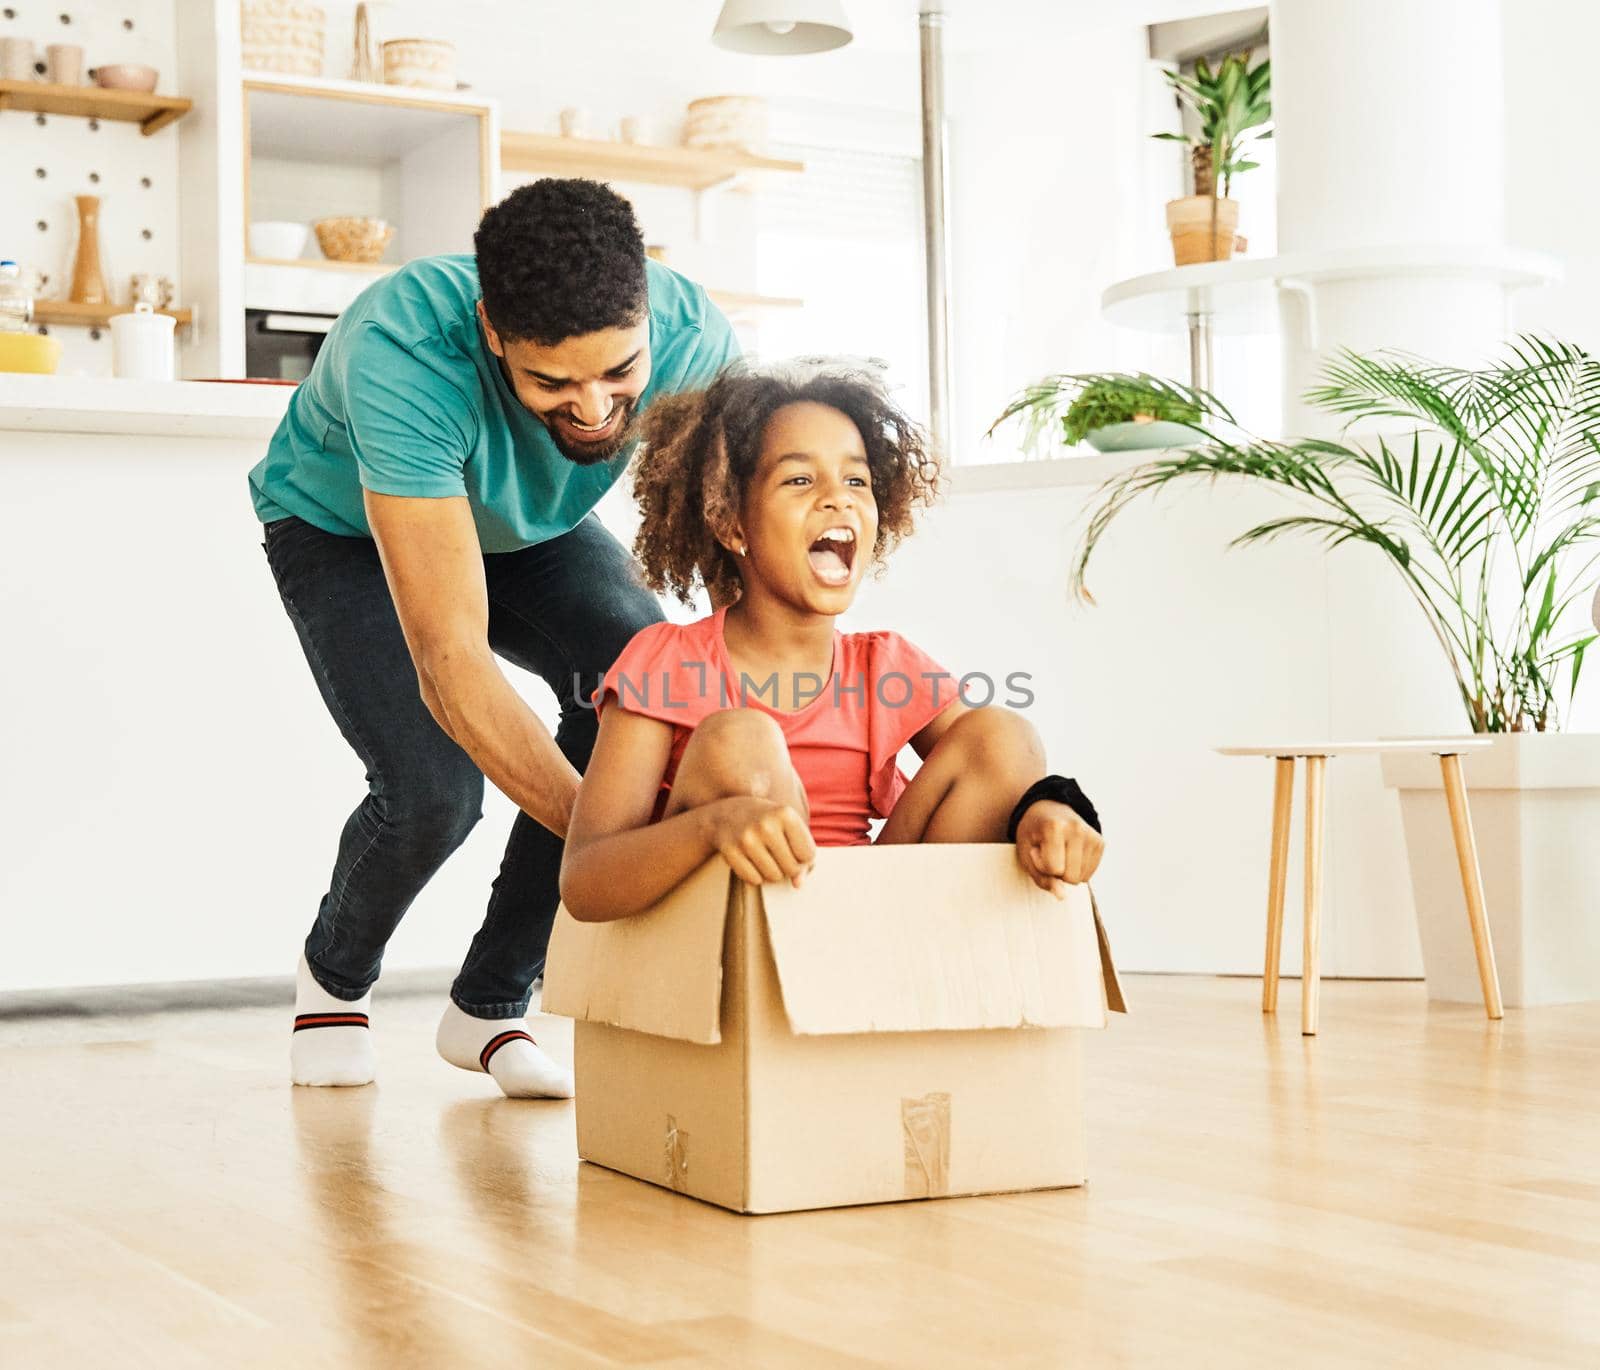 Father pushing his daughter sitting in a cardboard box, having fun at home